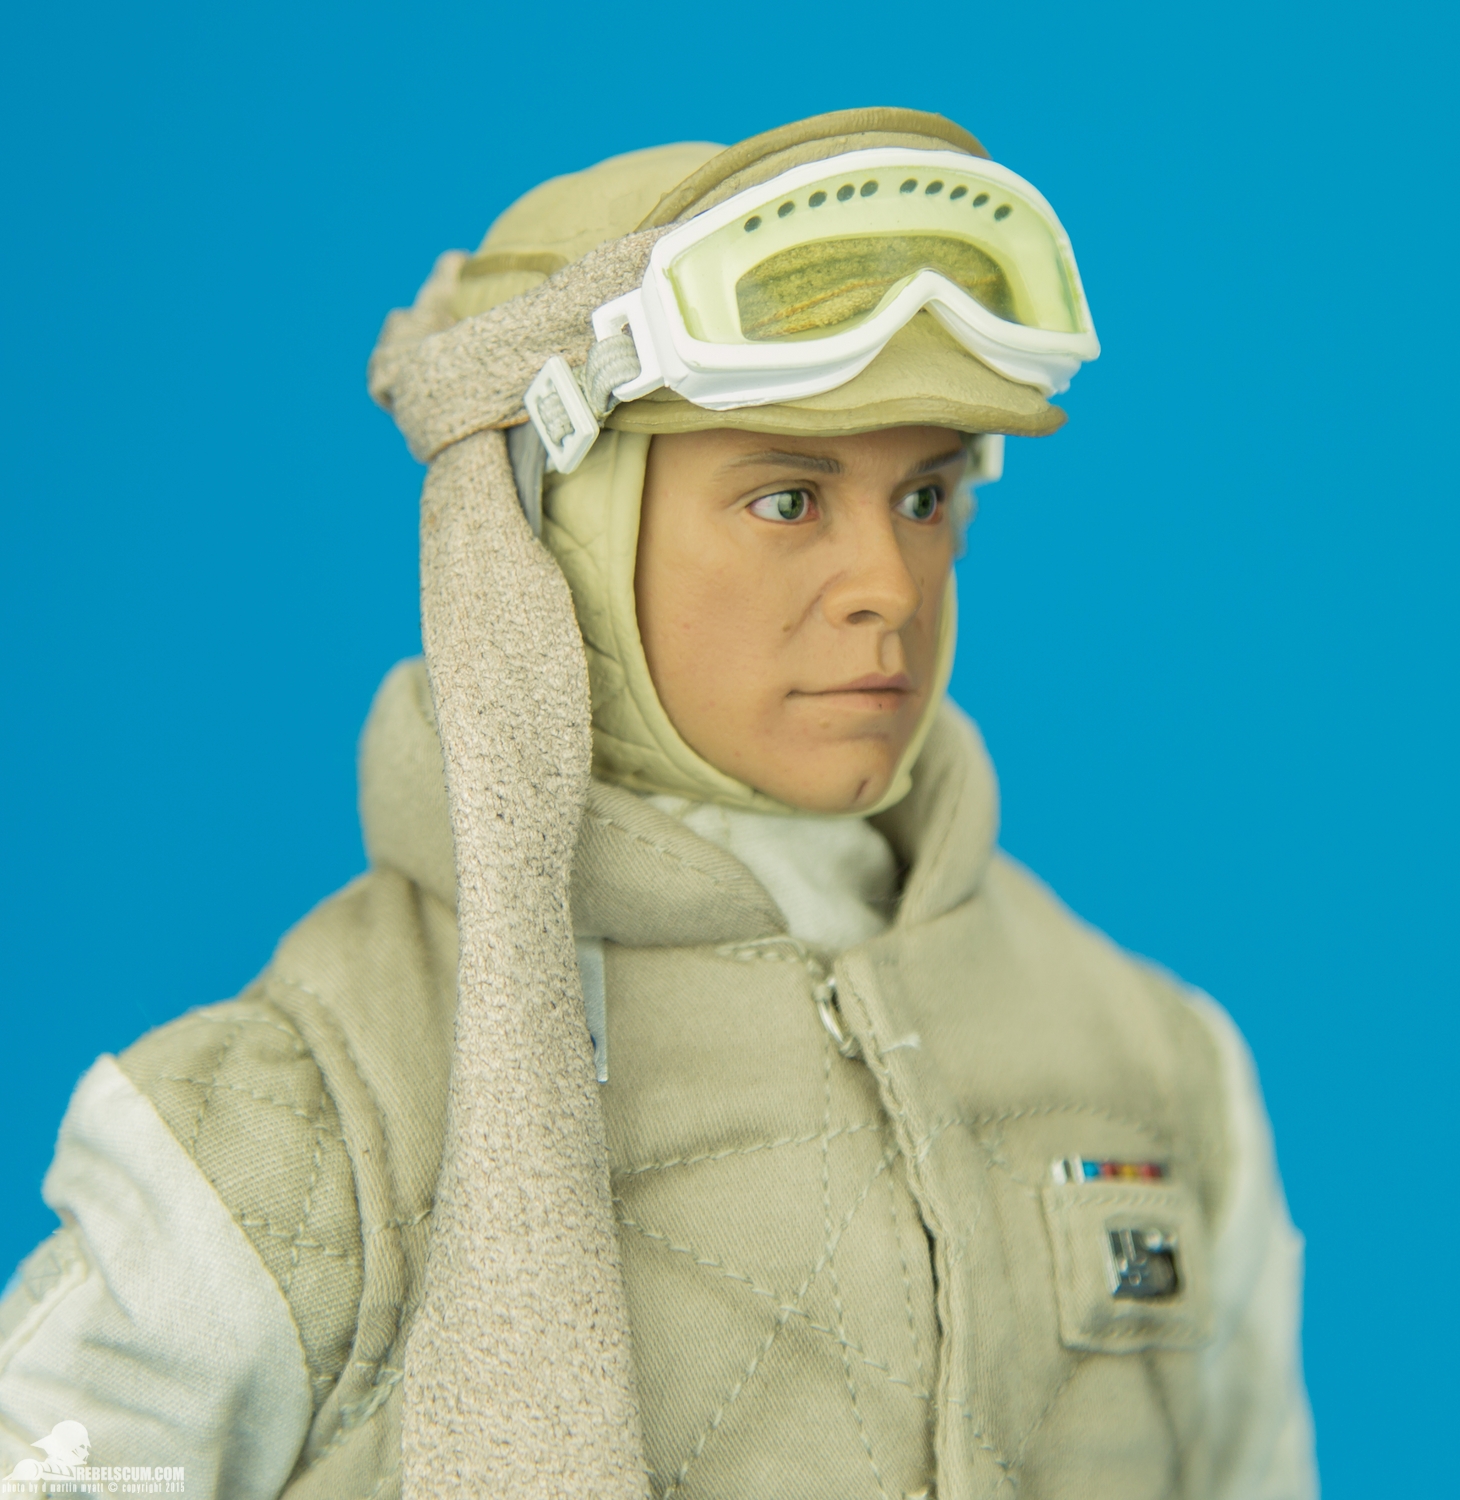 Luke-Skywalker-Hoth-Sixth-Scale-Sideshow-Collectibles-Star-Wars-018.jpg